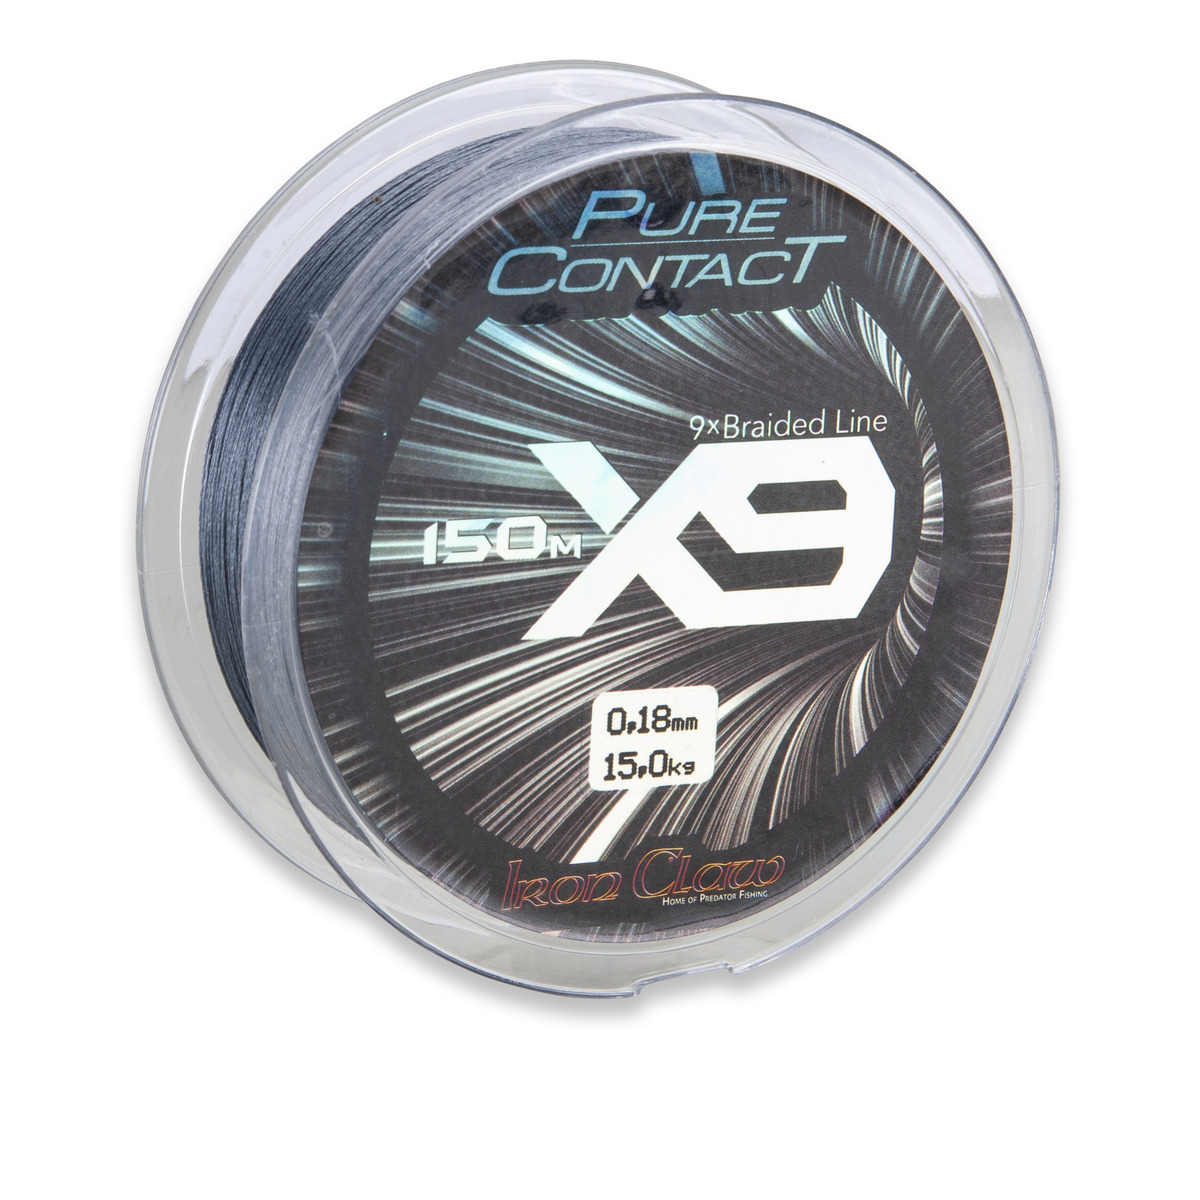 Iron Claw Pure Contact X9 Grey - 1500 m 0.21 mm